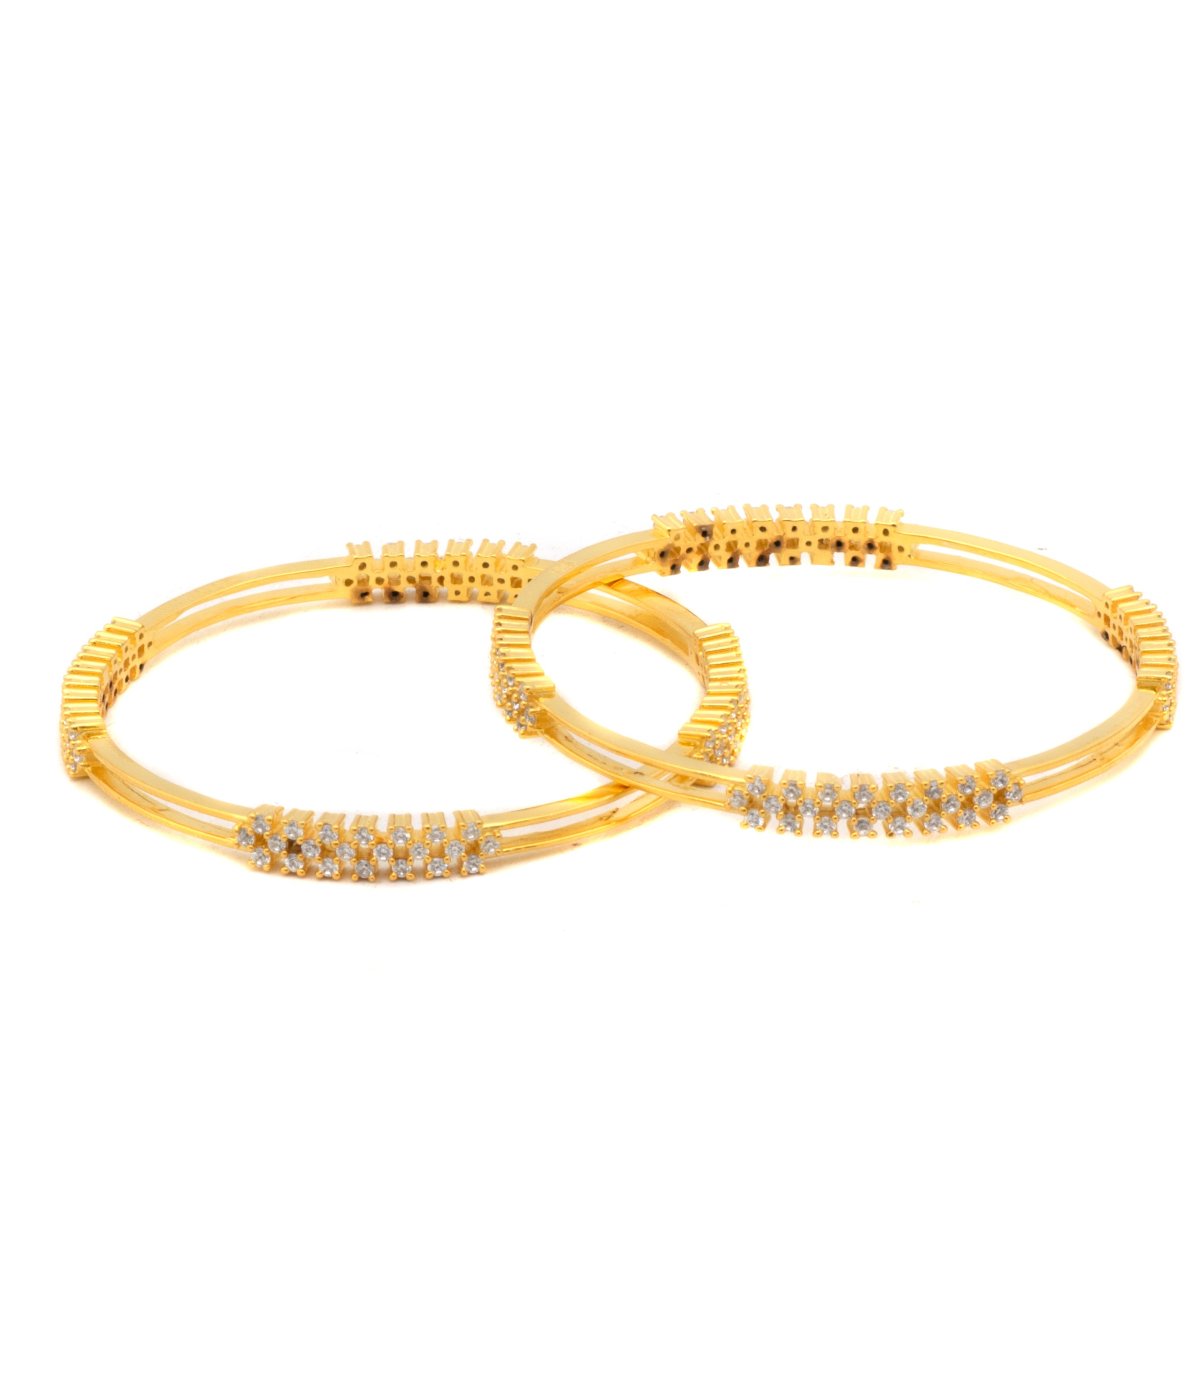 92.5 GOLD POLISH CUBIC ZIRCON STONE BANGLES FOR GIRLS AND WOMENS